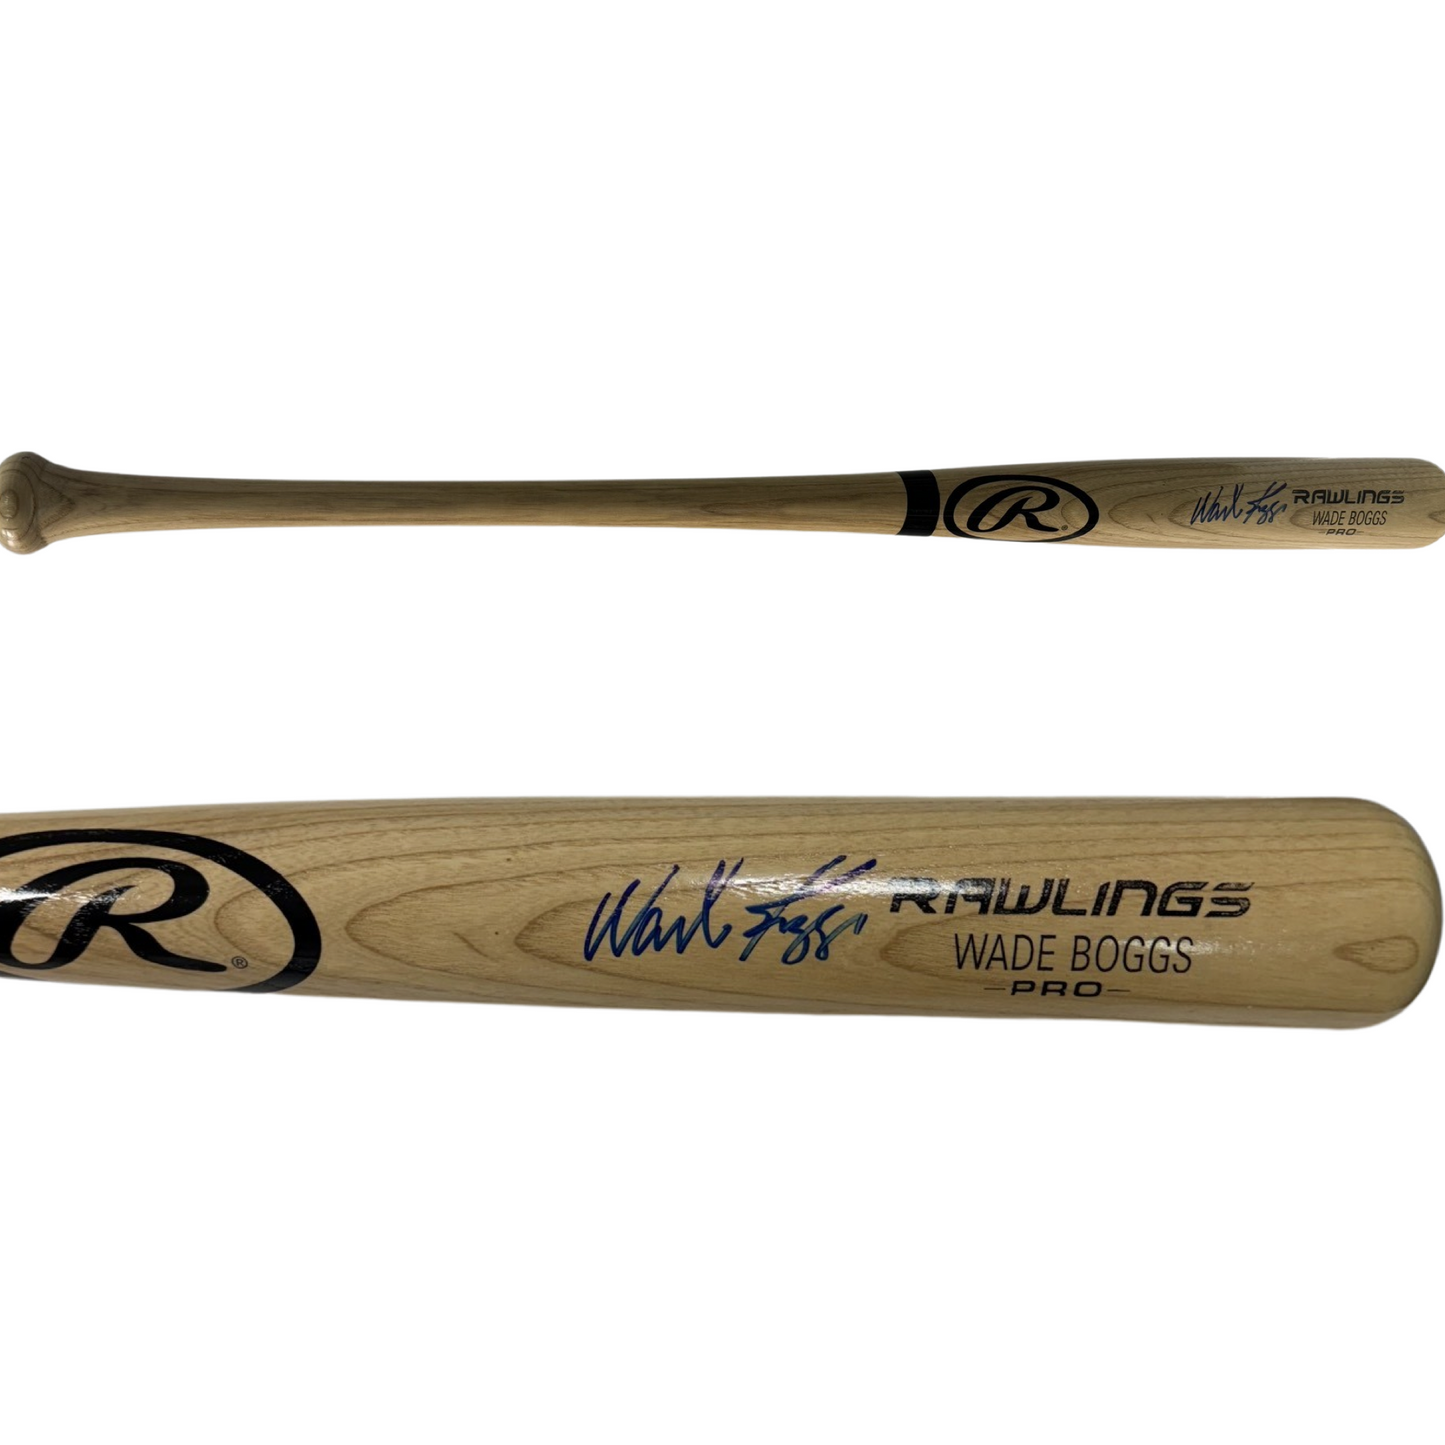 Wade Boggs Autographed Rawlings Pro Bat Tri Star